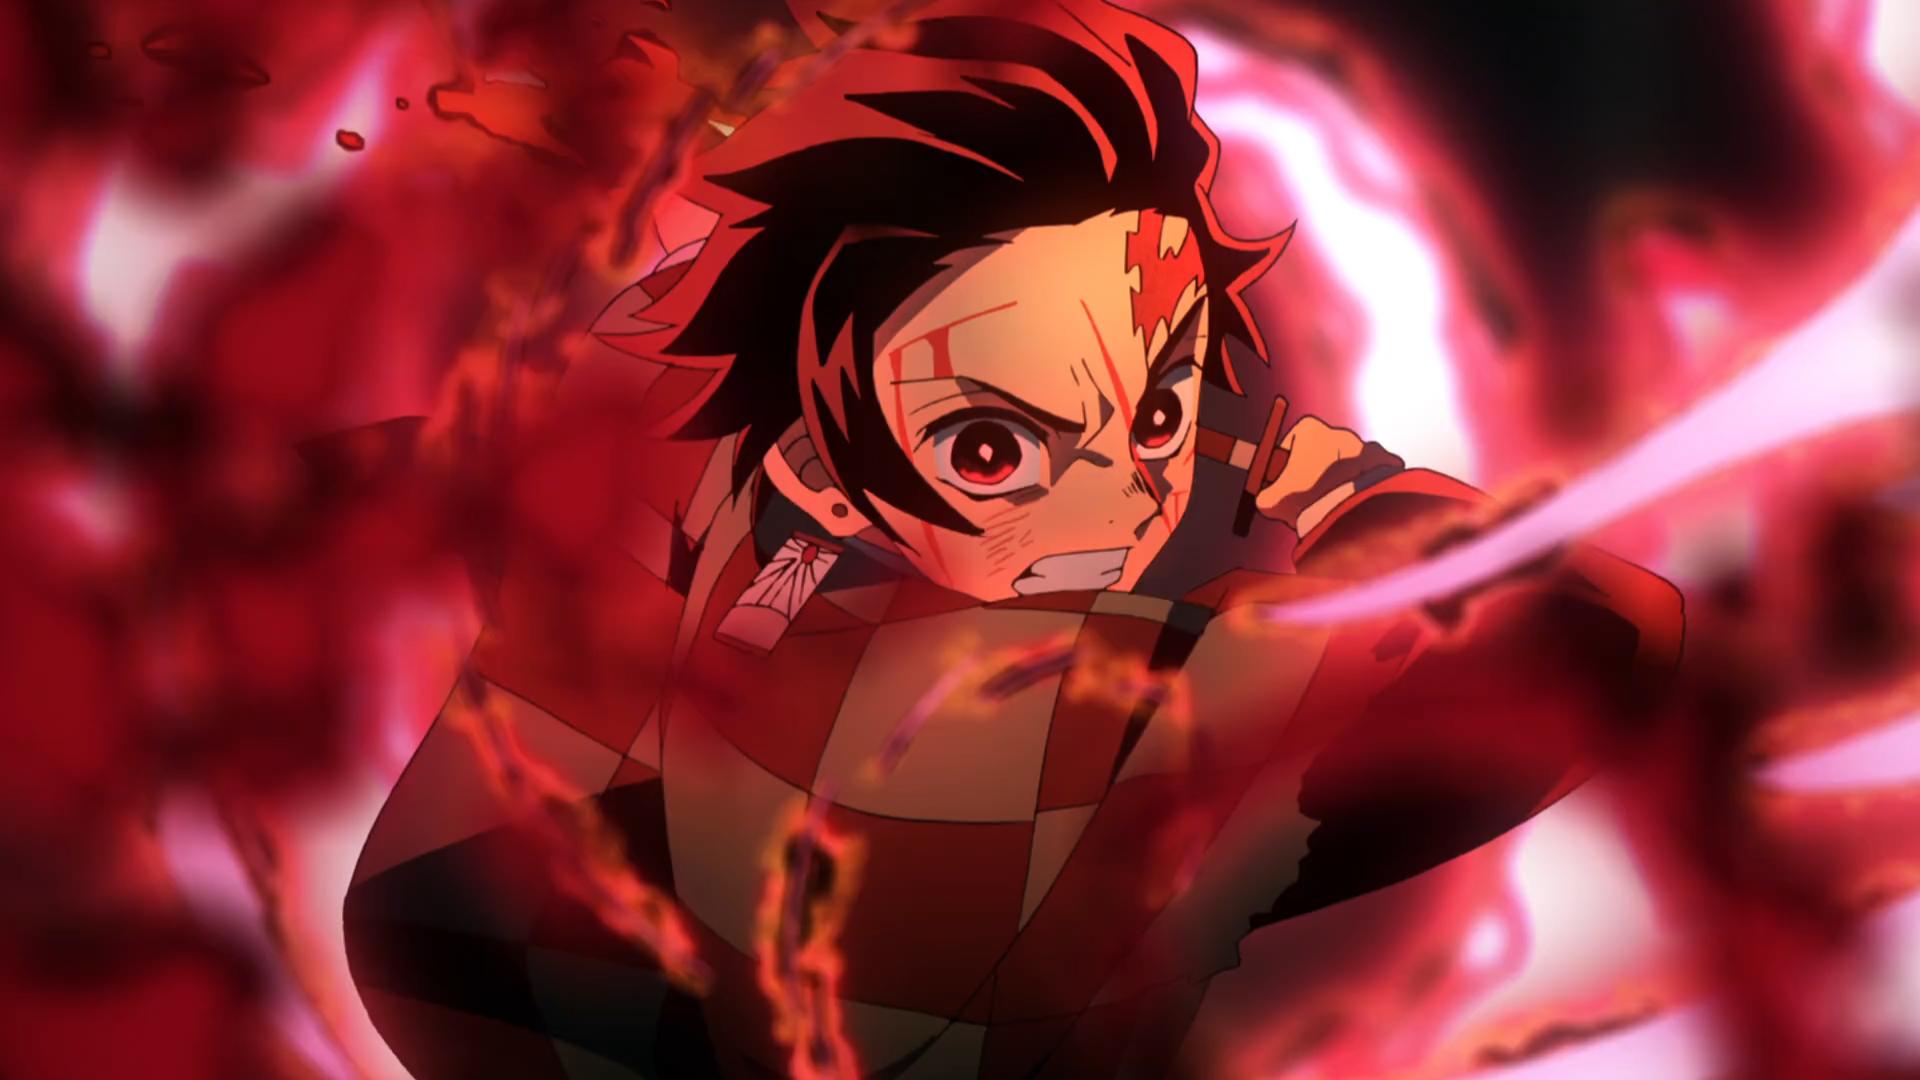 Demon Slayer Season 2 Release Date, Trailer, Spoilers and The Mugen Train connection